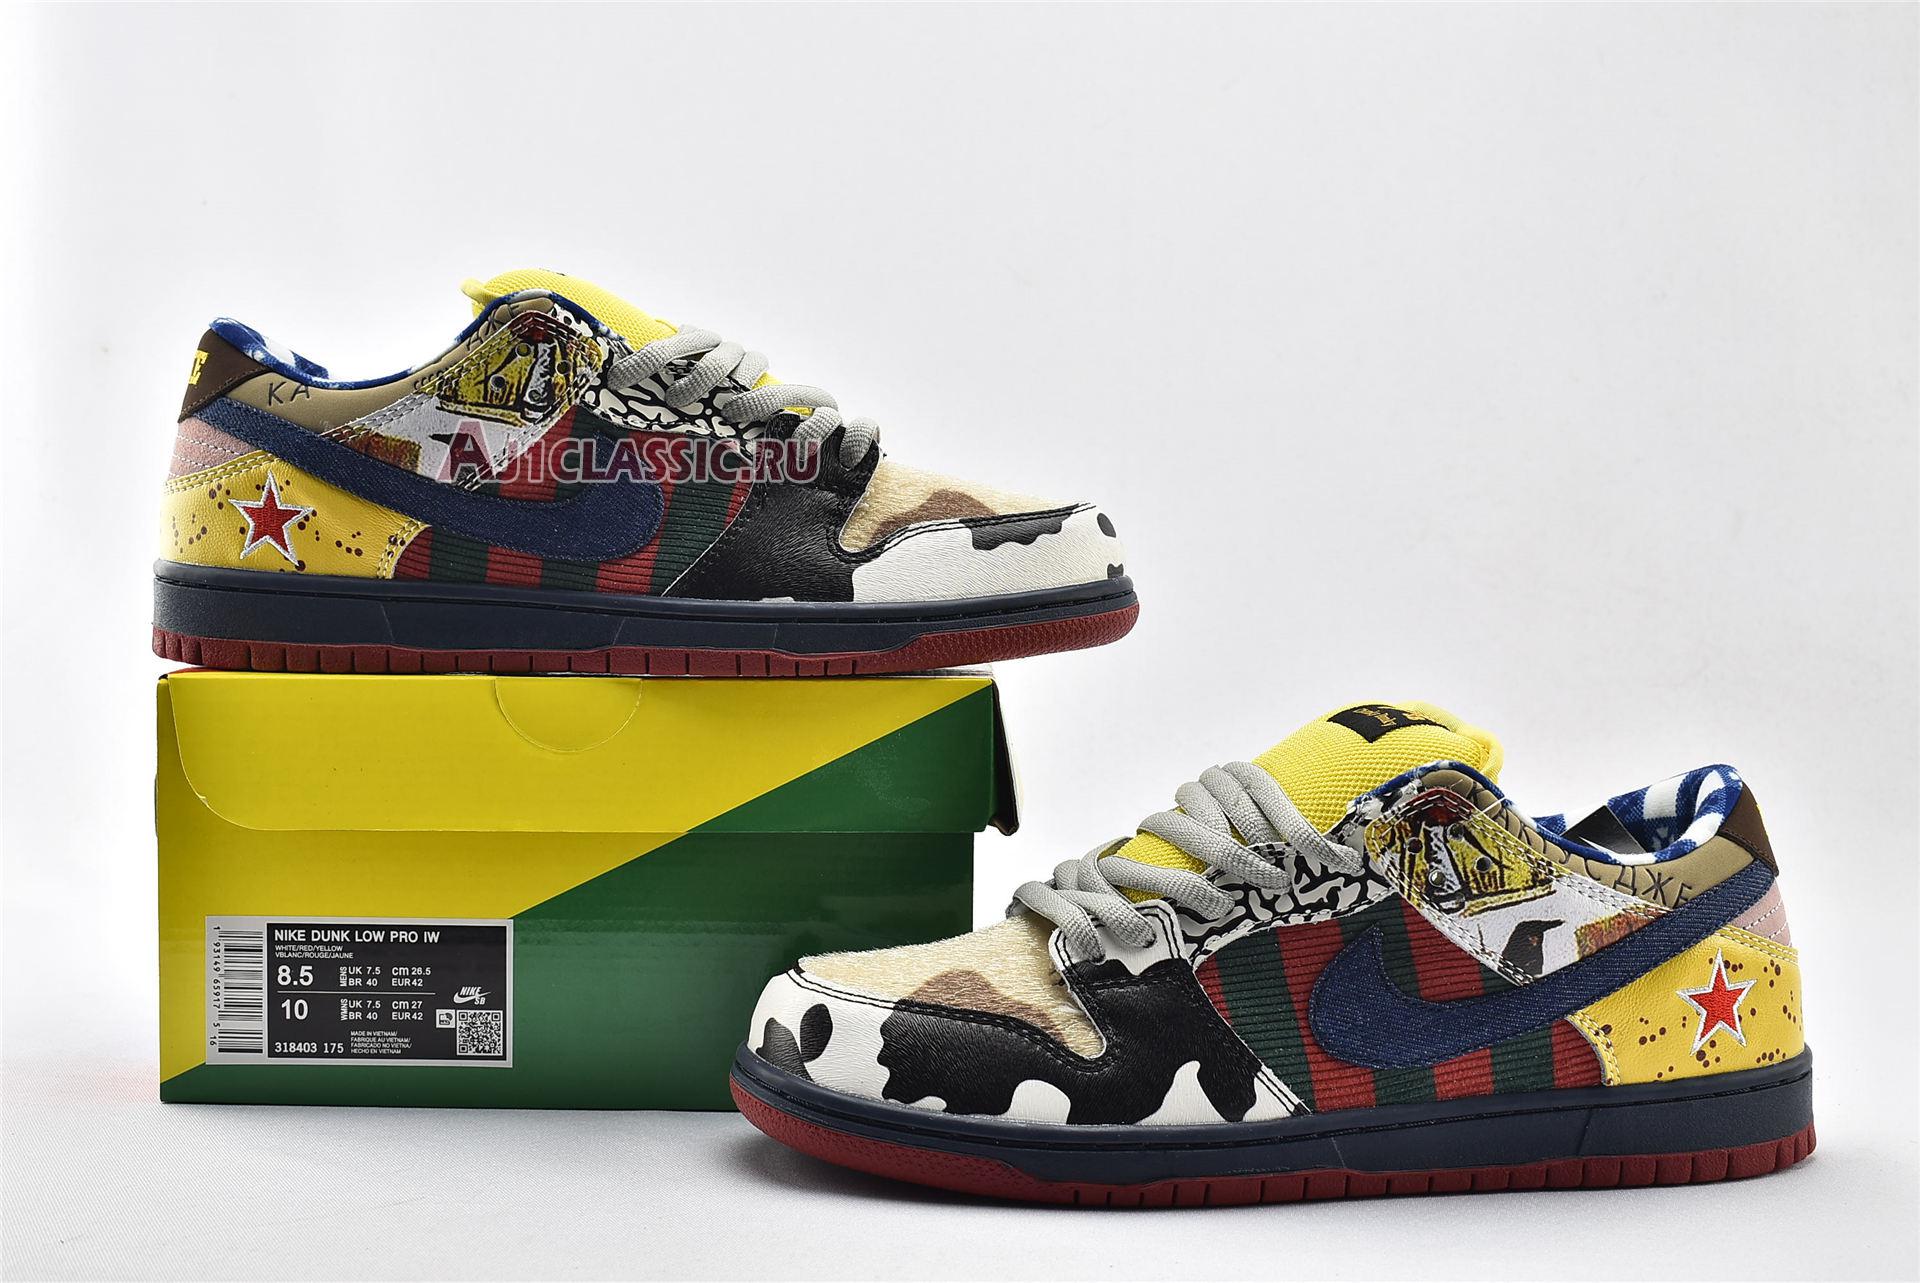 Nike Dunk Low SB "What The Dunk 2020" 318403-175